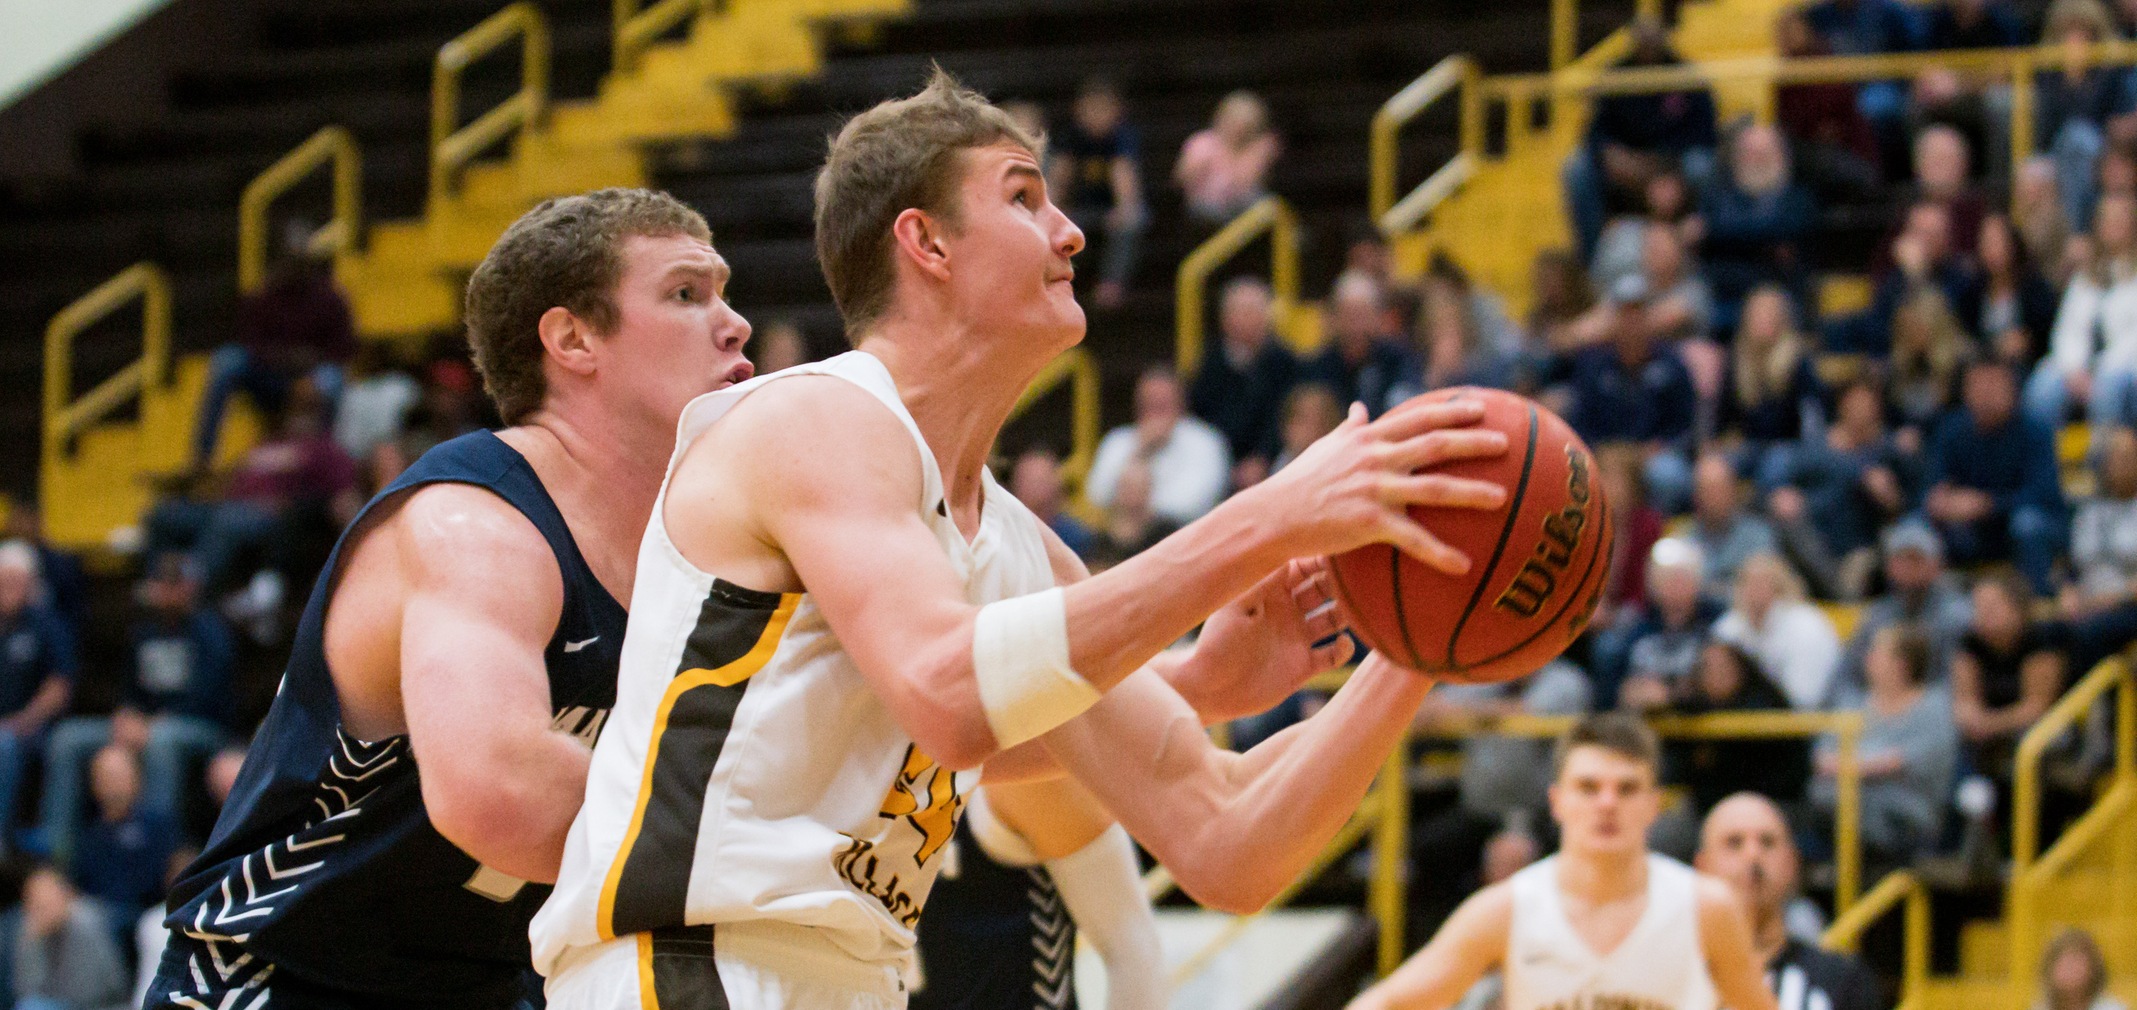 Senior forward Tyler Colombo scored a team-high 16 points in the loss to Marietta (Photo courtesy of Jesse Kucewicz)